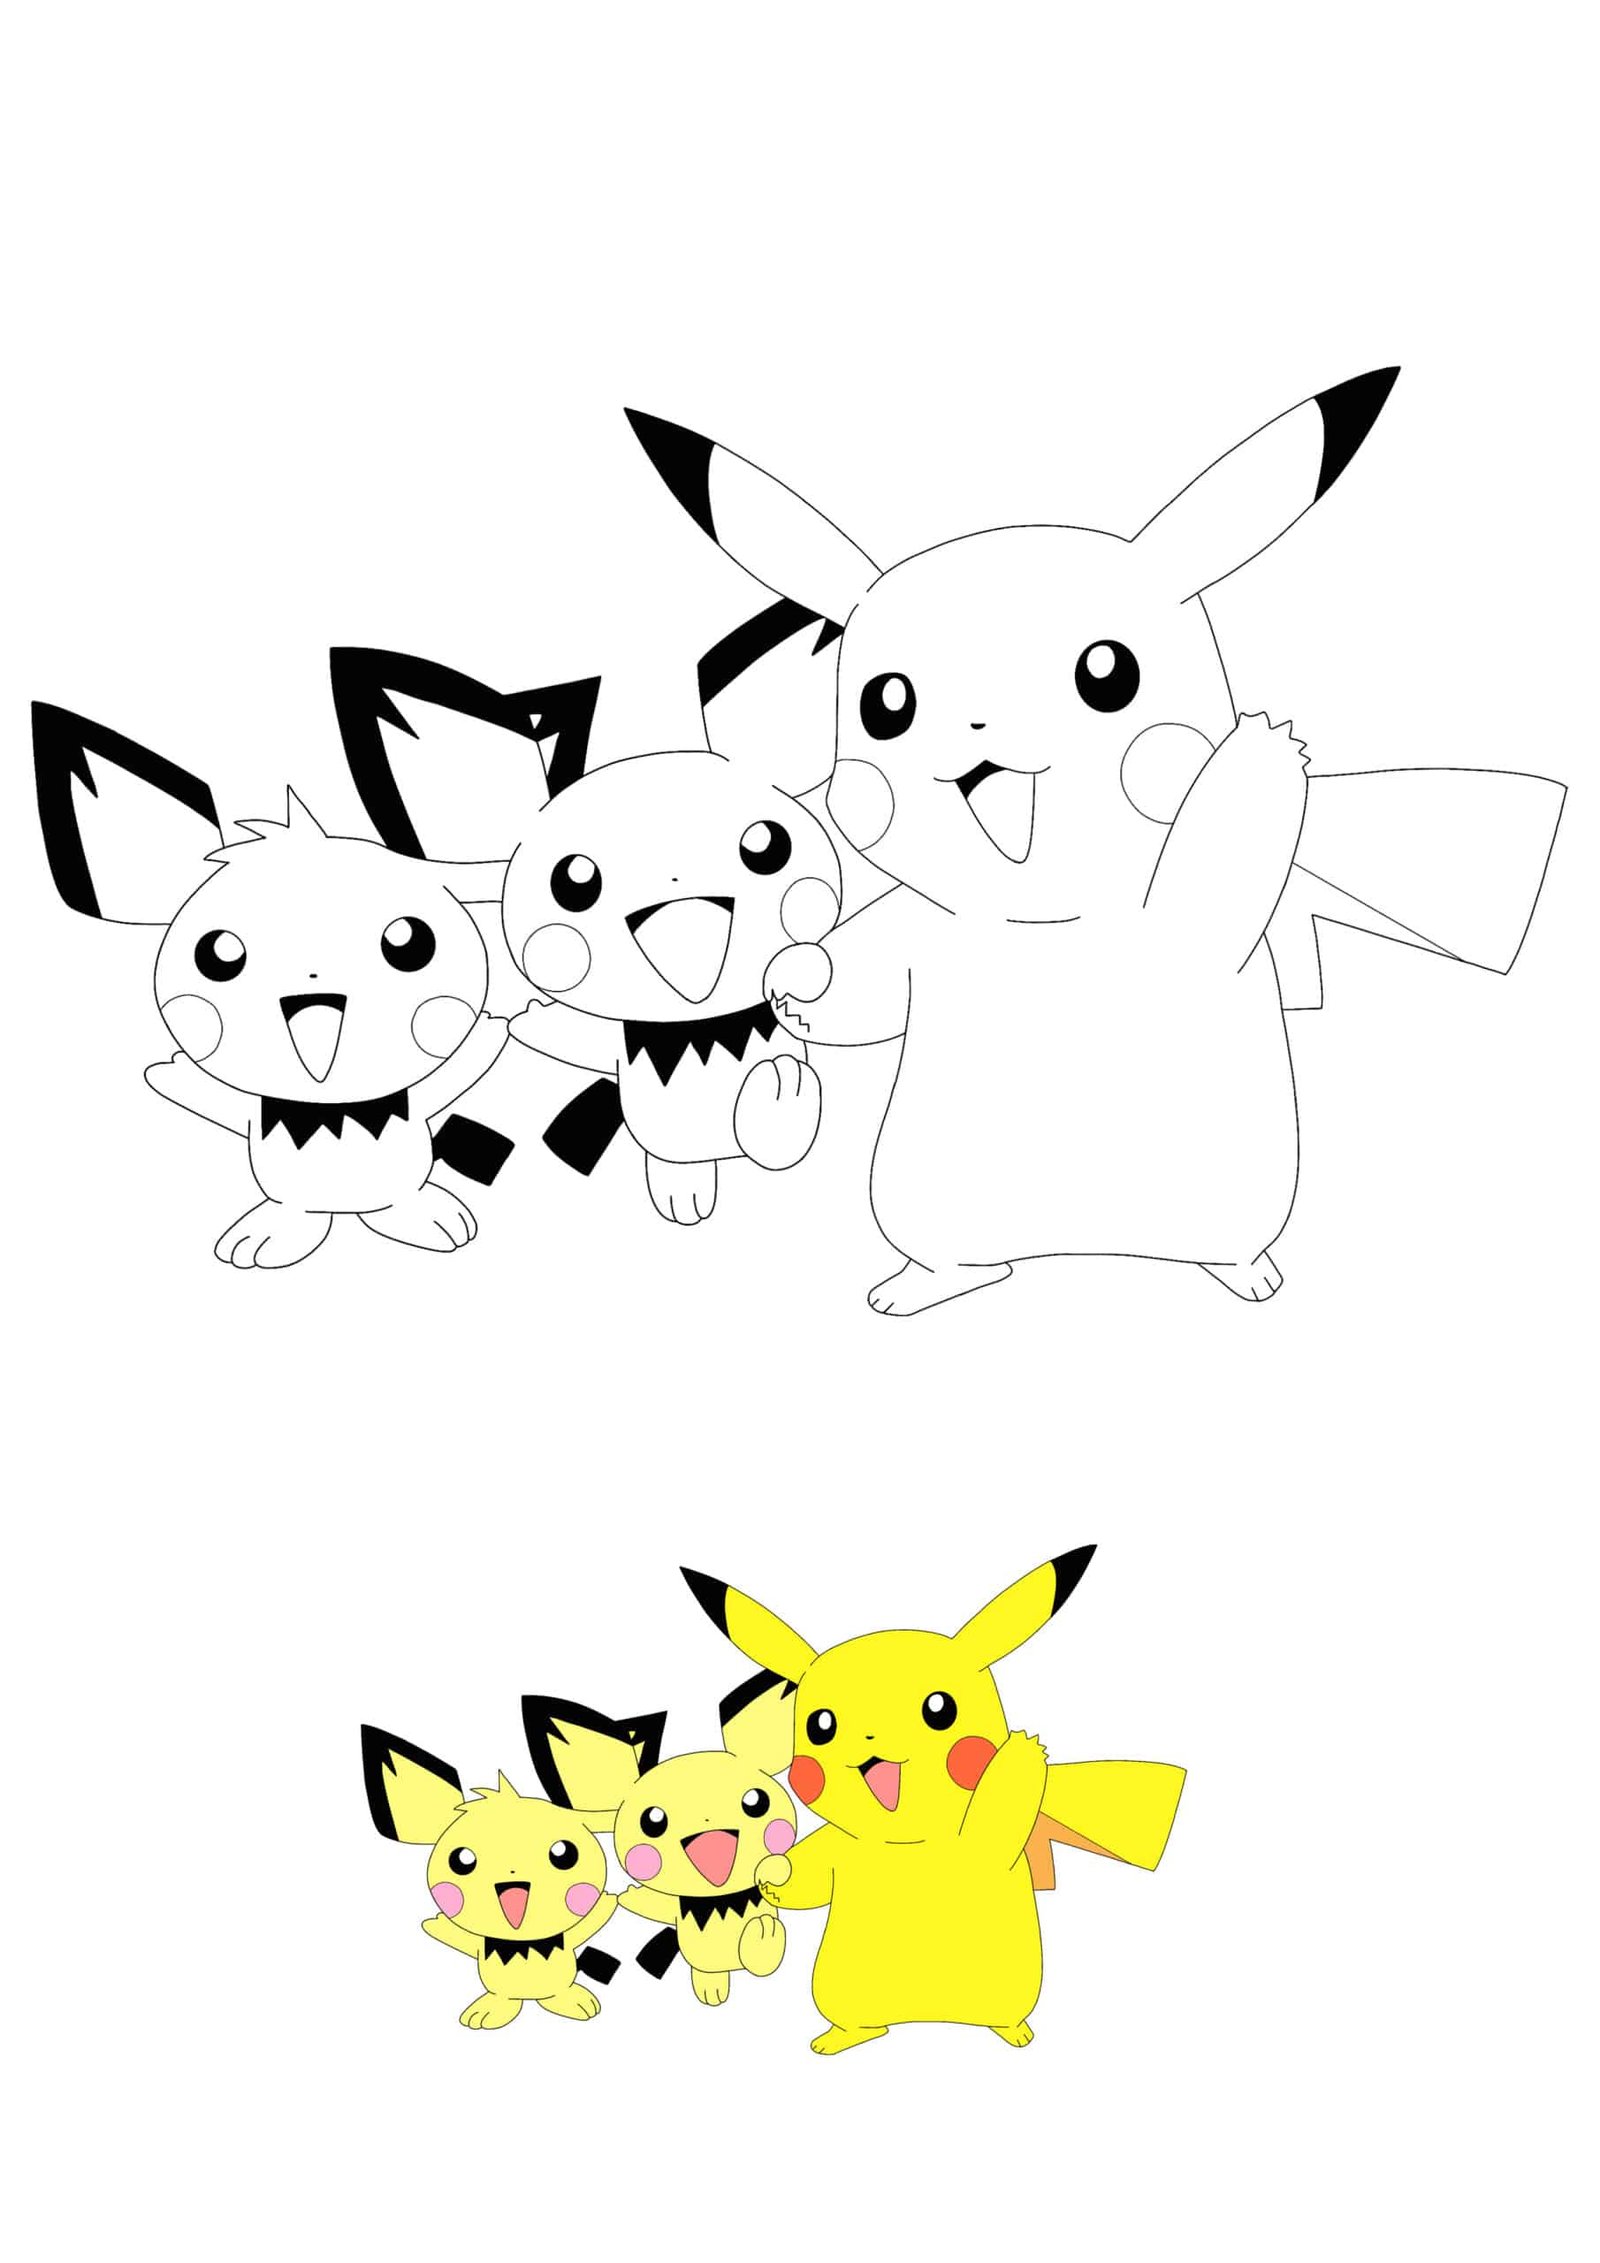 Pikachu and pichu coloring pages